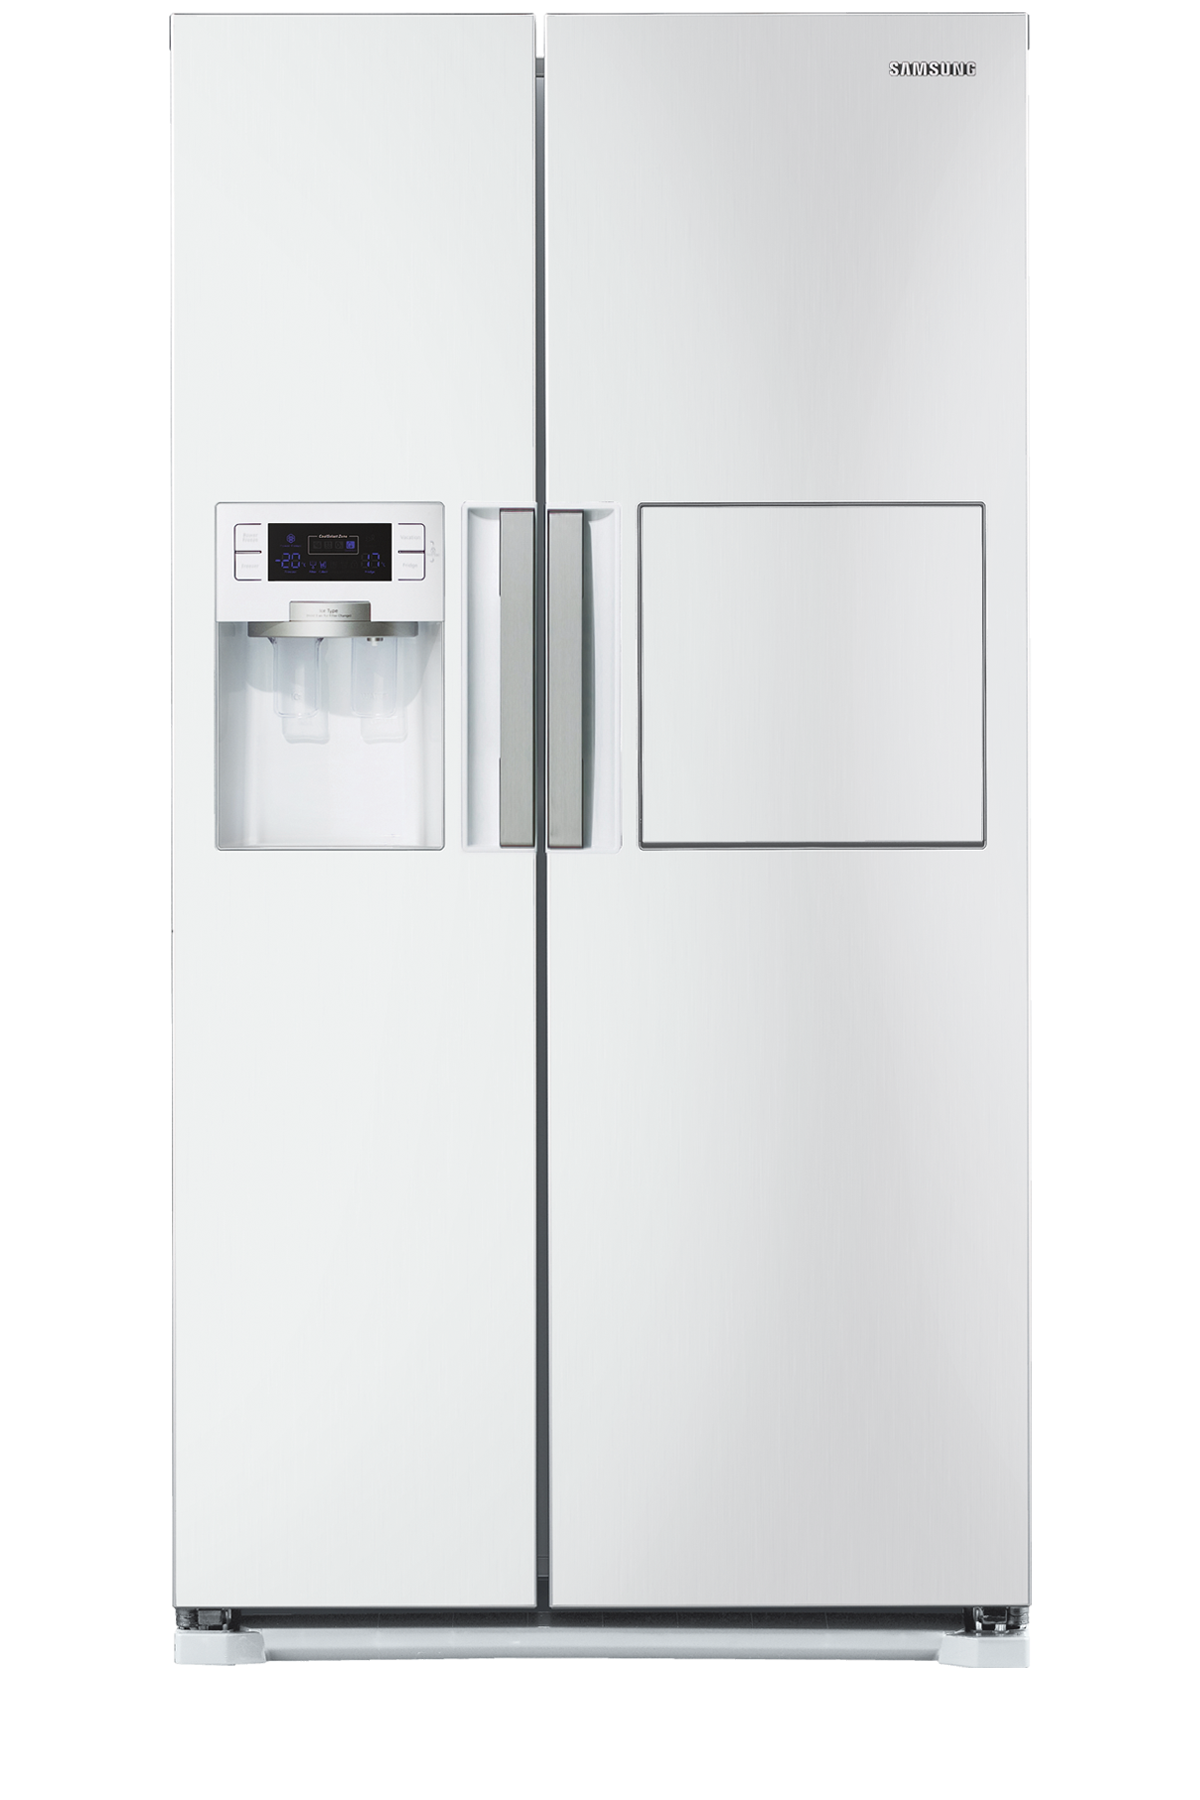 RSH7PNSW1 H Series Side By Side Refrigerator | SAMSUNG South Africa